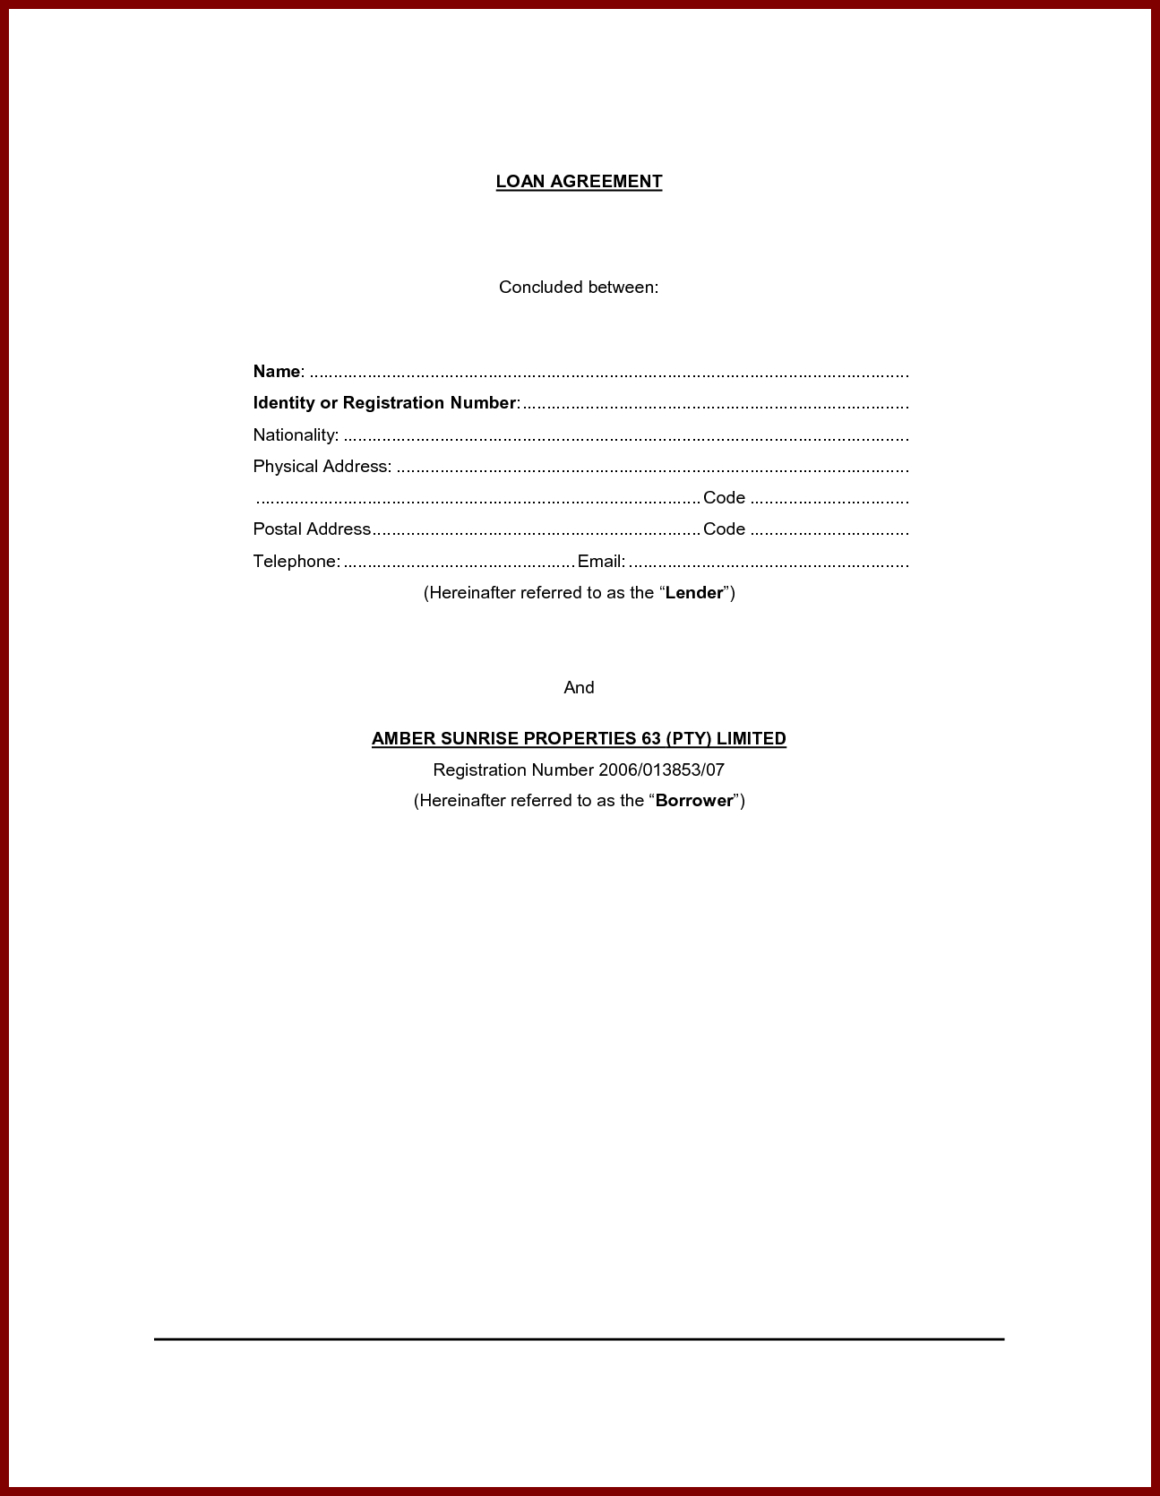 Personal Loan Contract Or Agreement Form Sample : Vientazona With Blank Loan Agreement Template